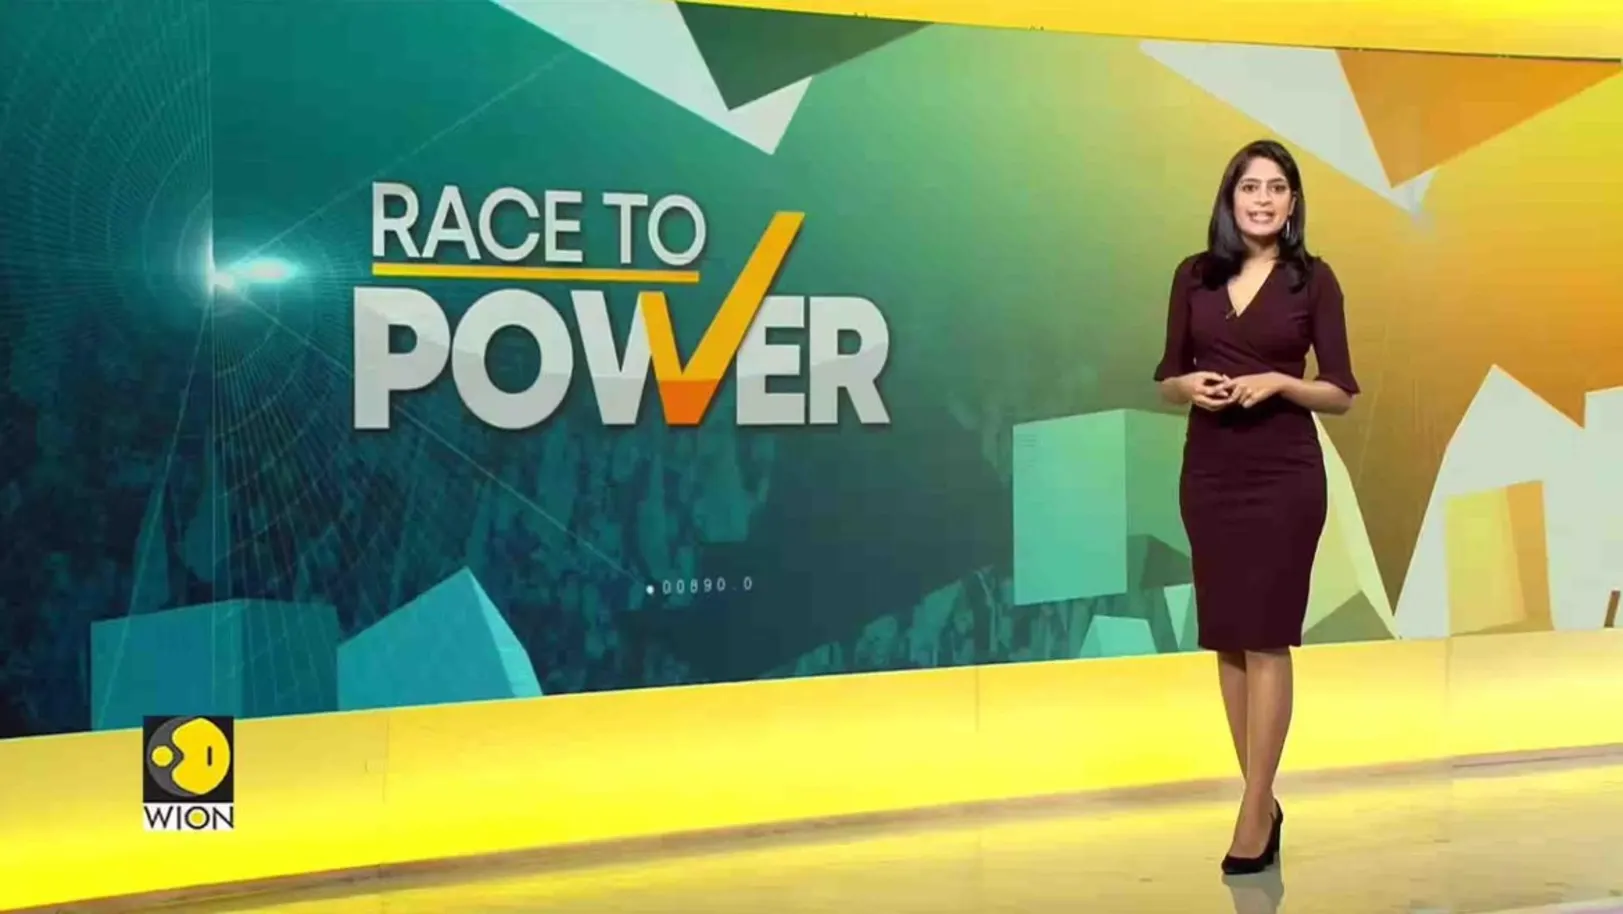 Race To Power Streaming Now On WION